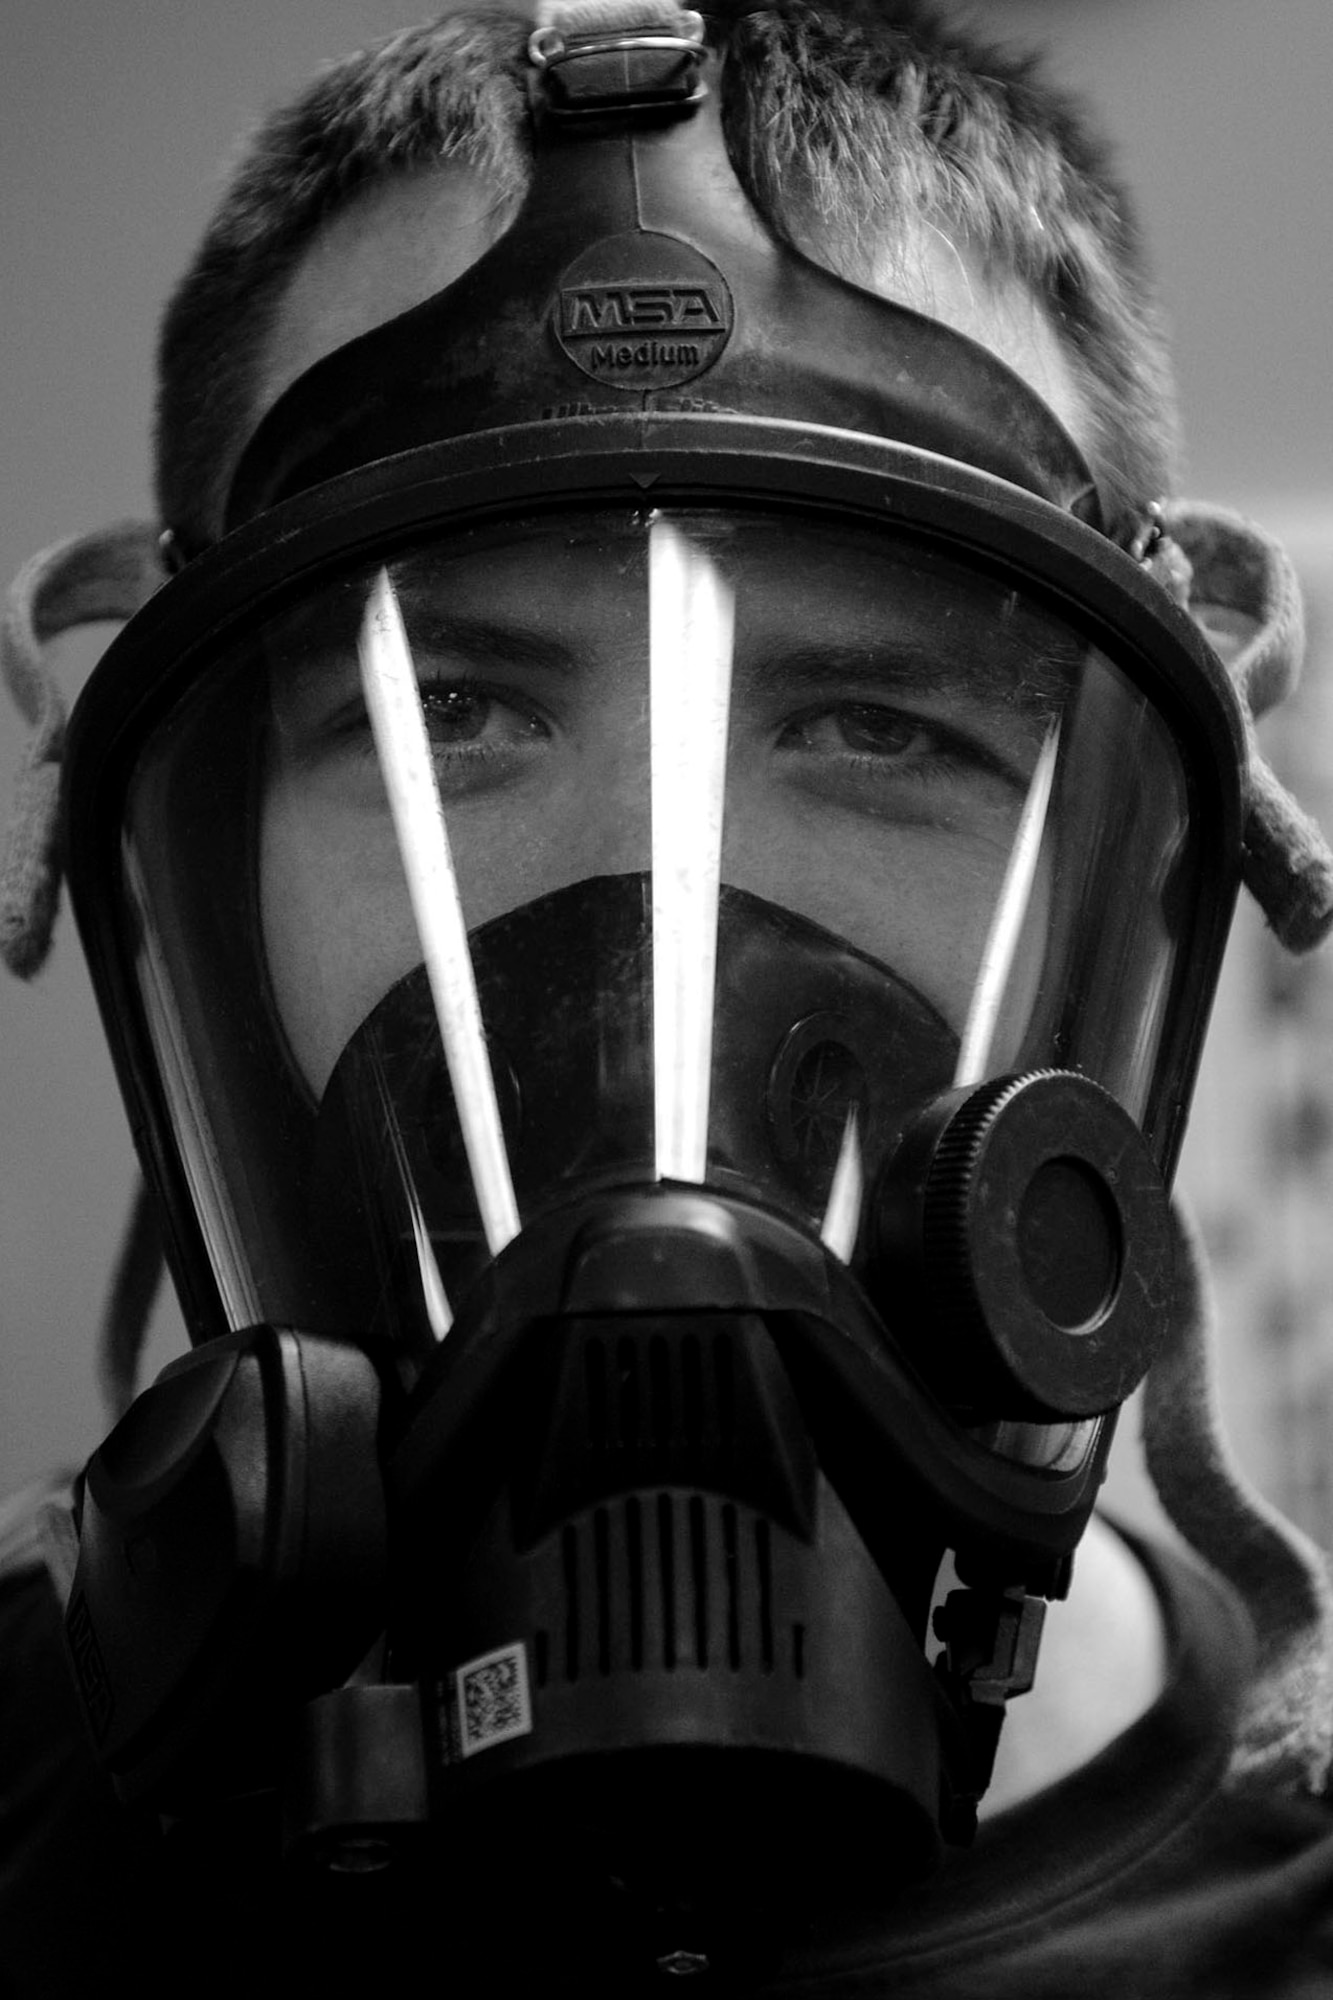 2nd Lt. Eric Olson, 23d Aerospace Medicine Squadron bioenvironmental engineer, gears up during readiness training, Jan. 12, 2018, at Moody Air Force Base, Ga. The Bioenvironmental Engineering Flight tested their response capabilities in a simulated contamination scenario. Bioenvironmental engineering specialists focus on reducing health hazards in the workplace and surrounding areas. (U.S. Air Force photo illustration by Airman 1st Class Erick Requadt)